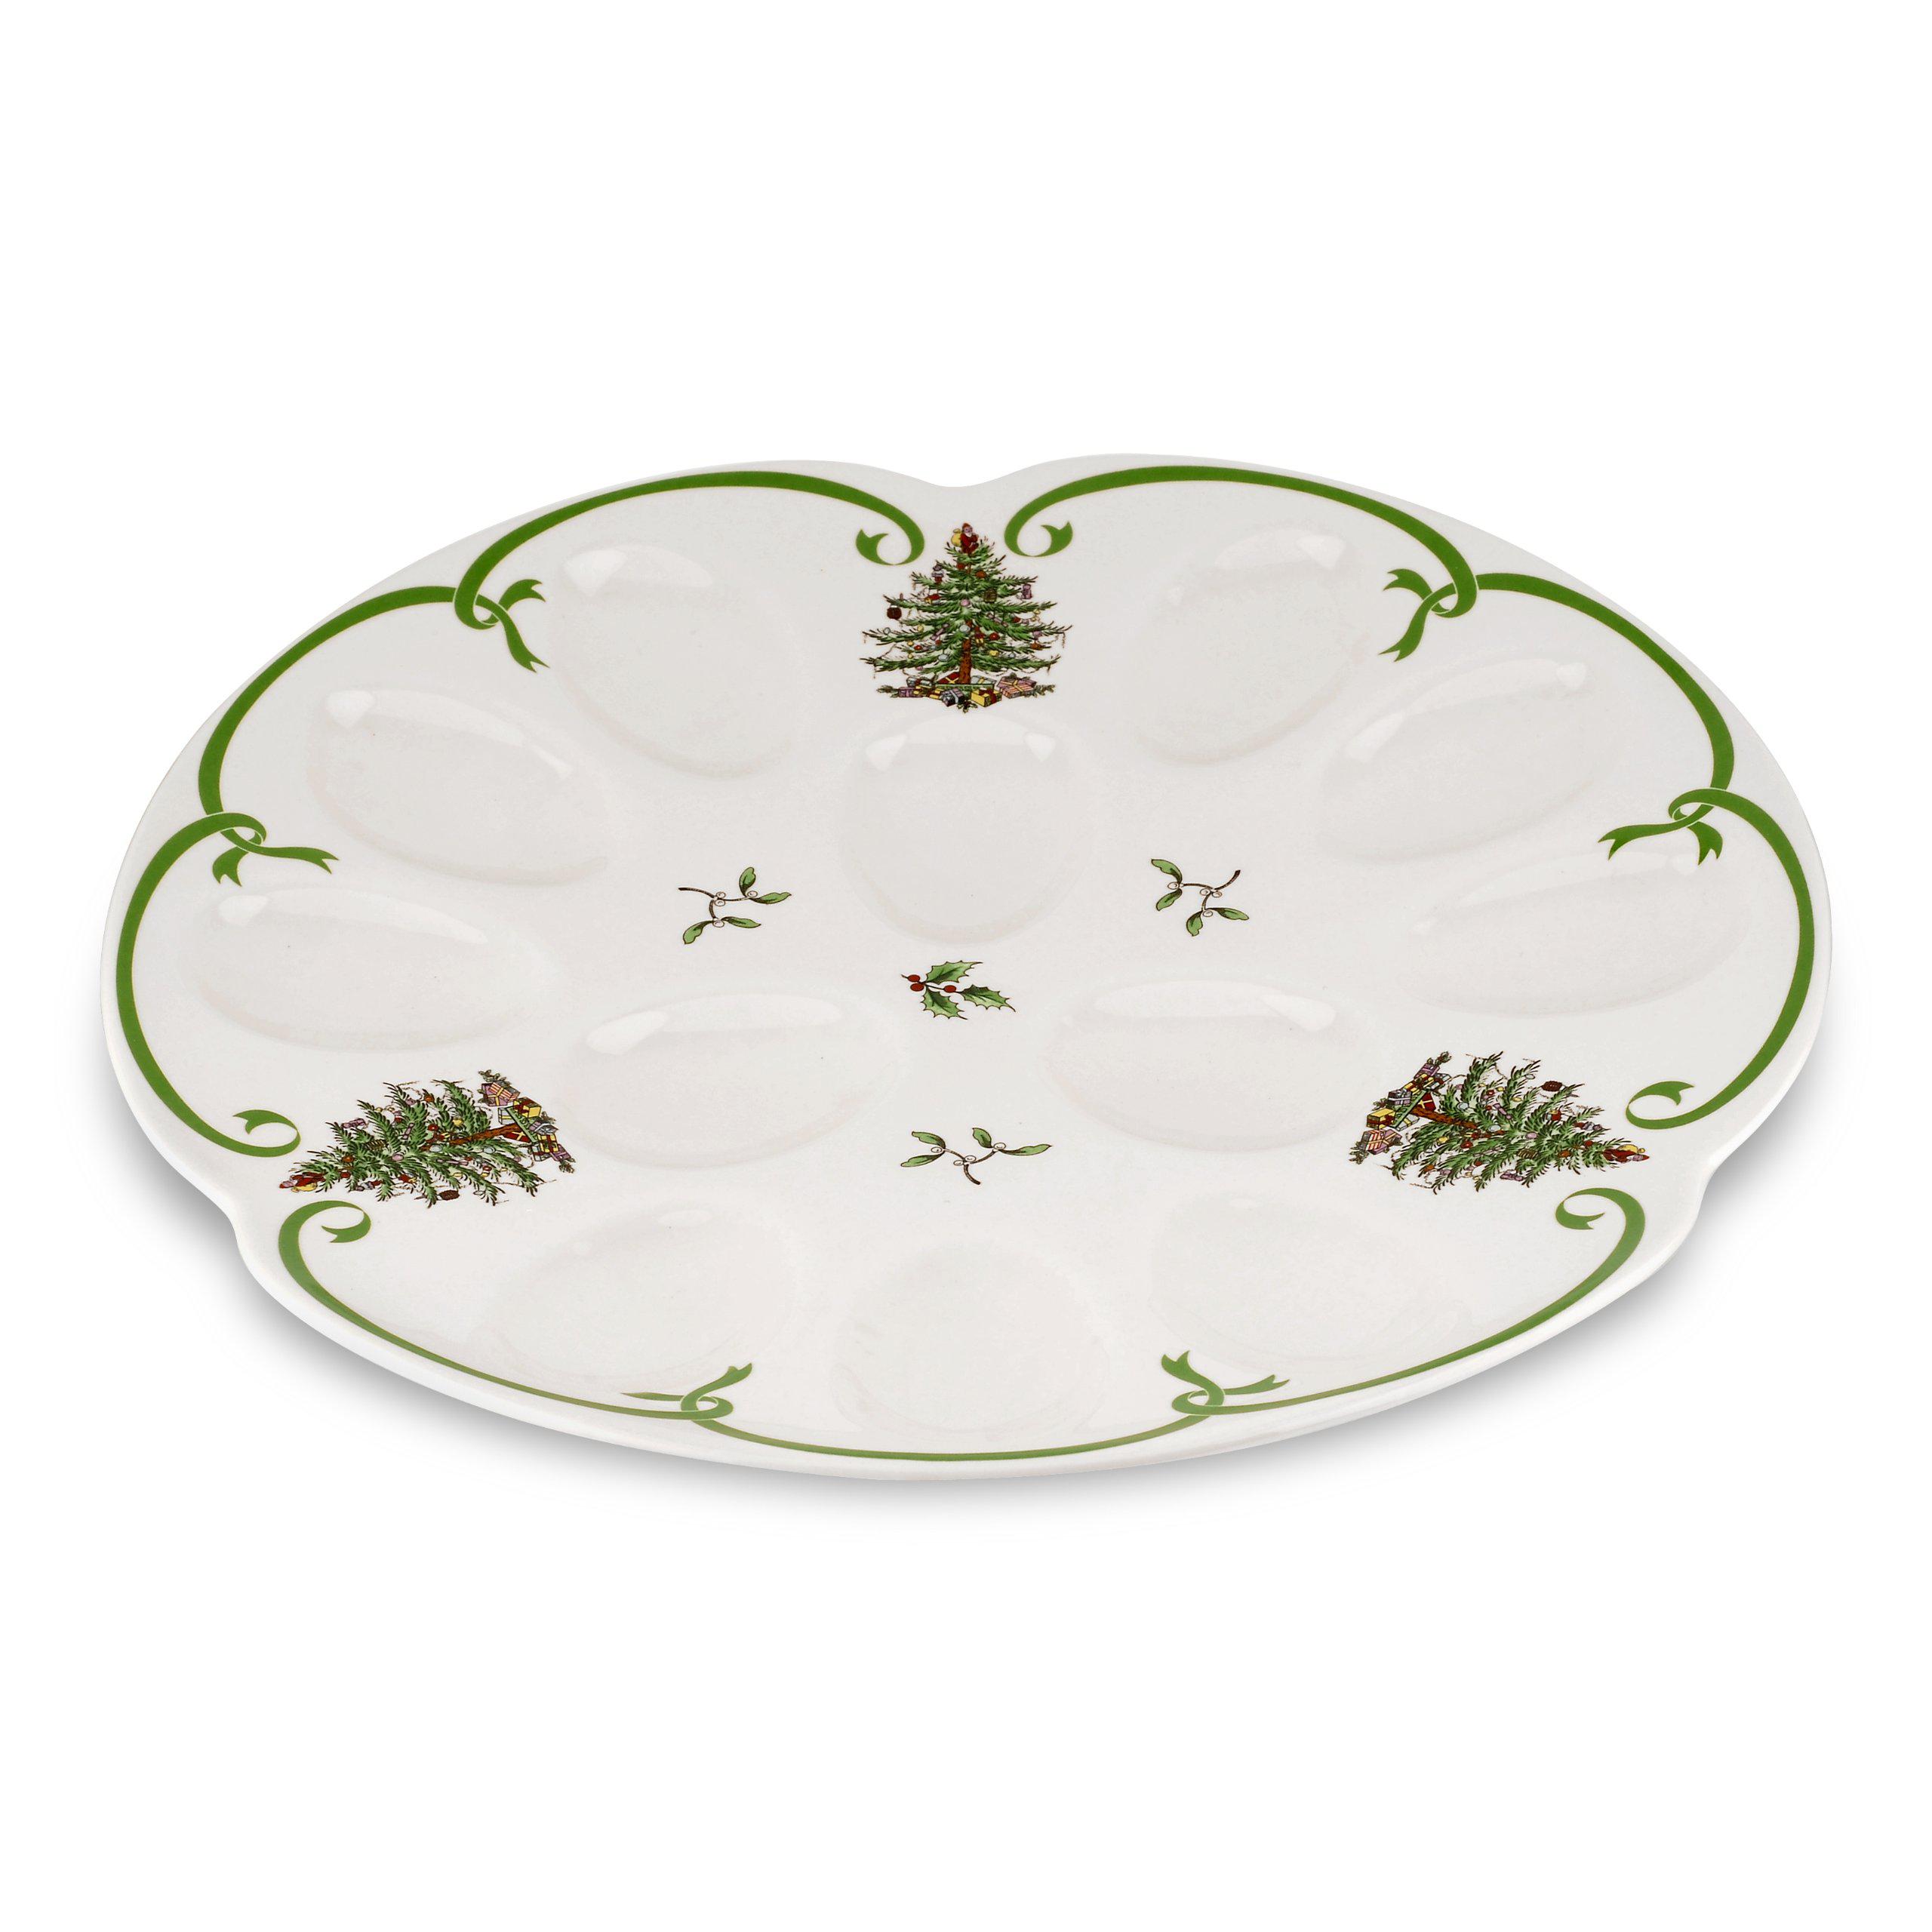 spode christmas tree deviled egg plate | 13 inch egg serving platter with christmas tree and mistletoe motif | made from fine